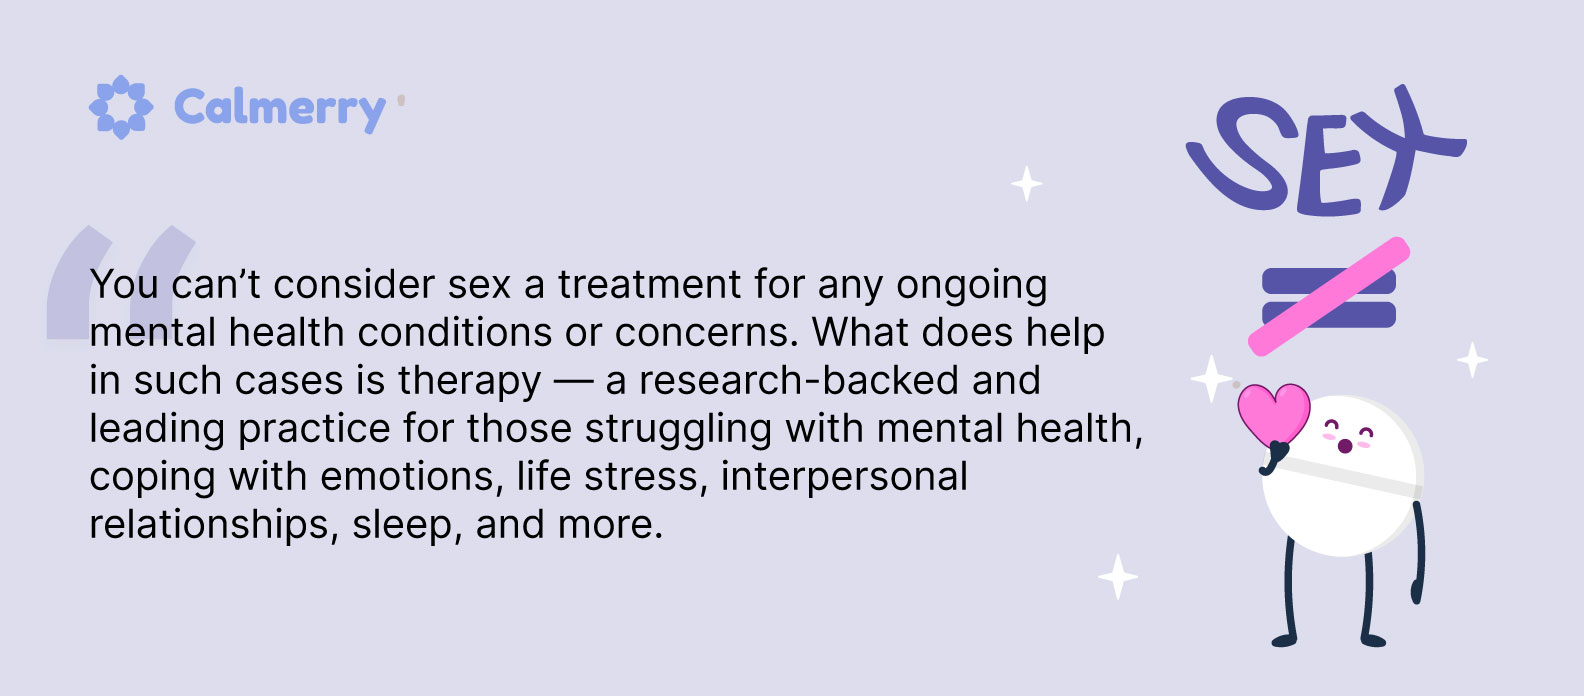 You can’t consider sex a treatment for any ongoing mental health conditions or concerns. What does help in such cases is therapy — a research-backed and leading practice for those struggling with mental health, coping with emotions, life stress, interpersonal relationships, sleep, and more. 